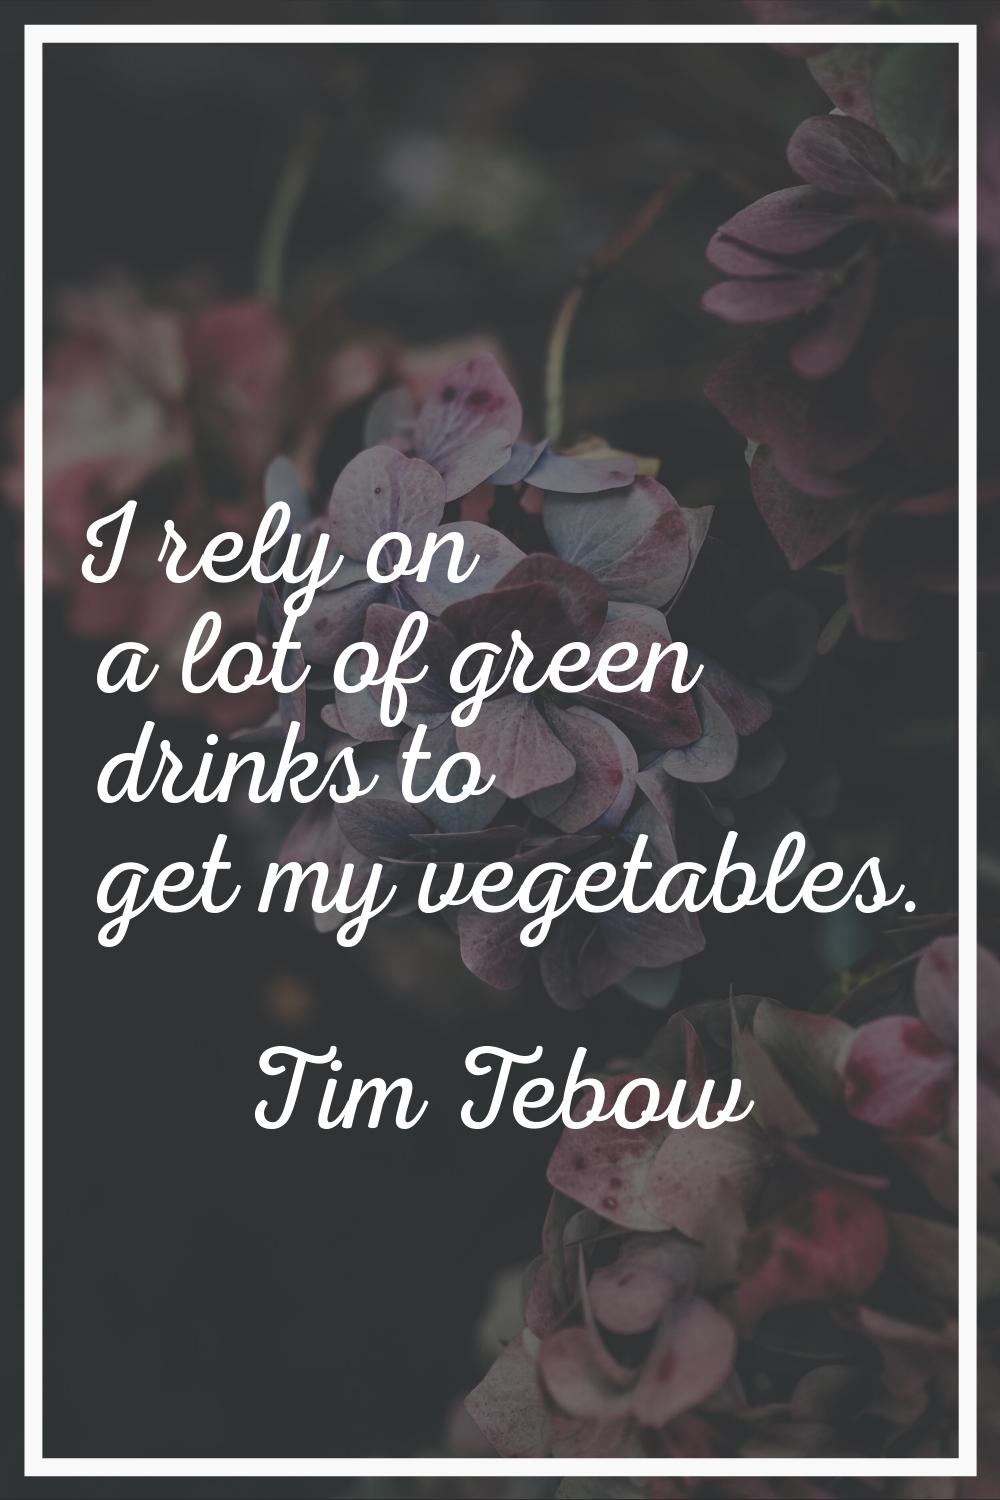 I rely on a lot of green drinks to get my vegetables.